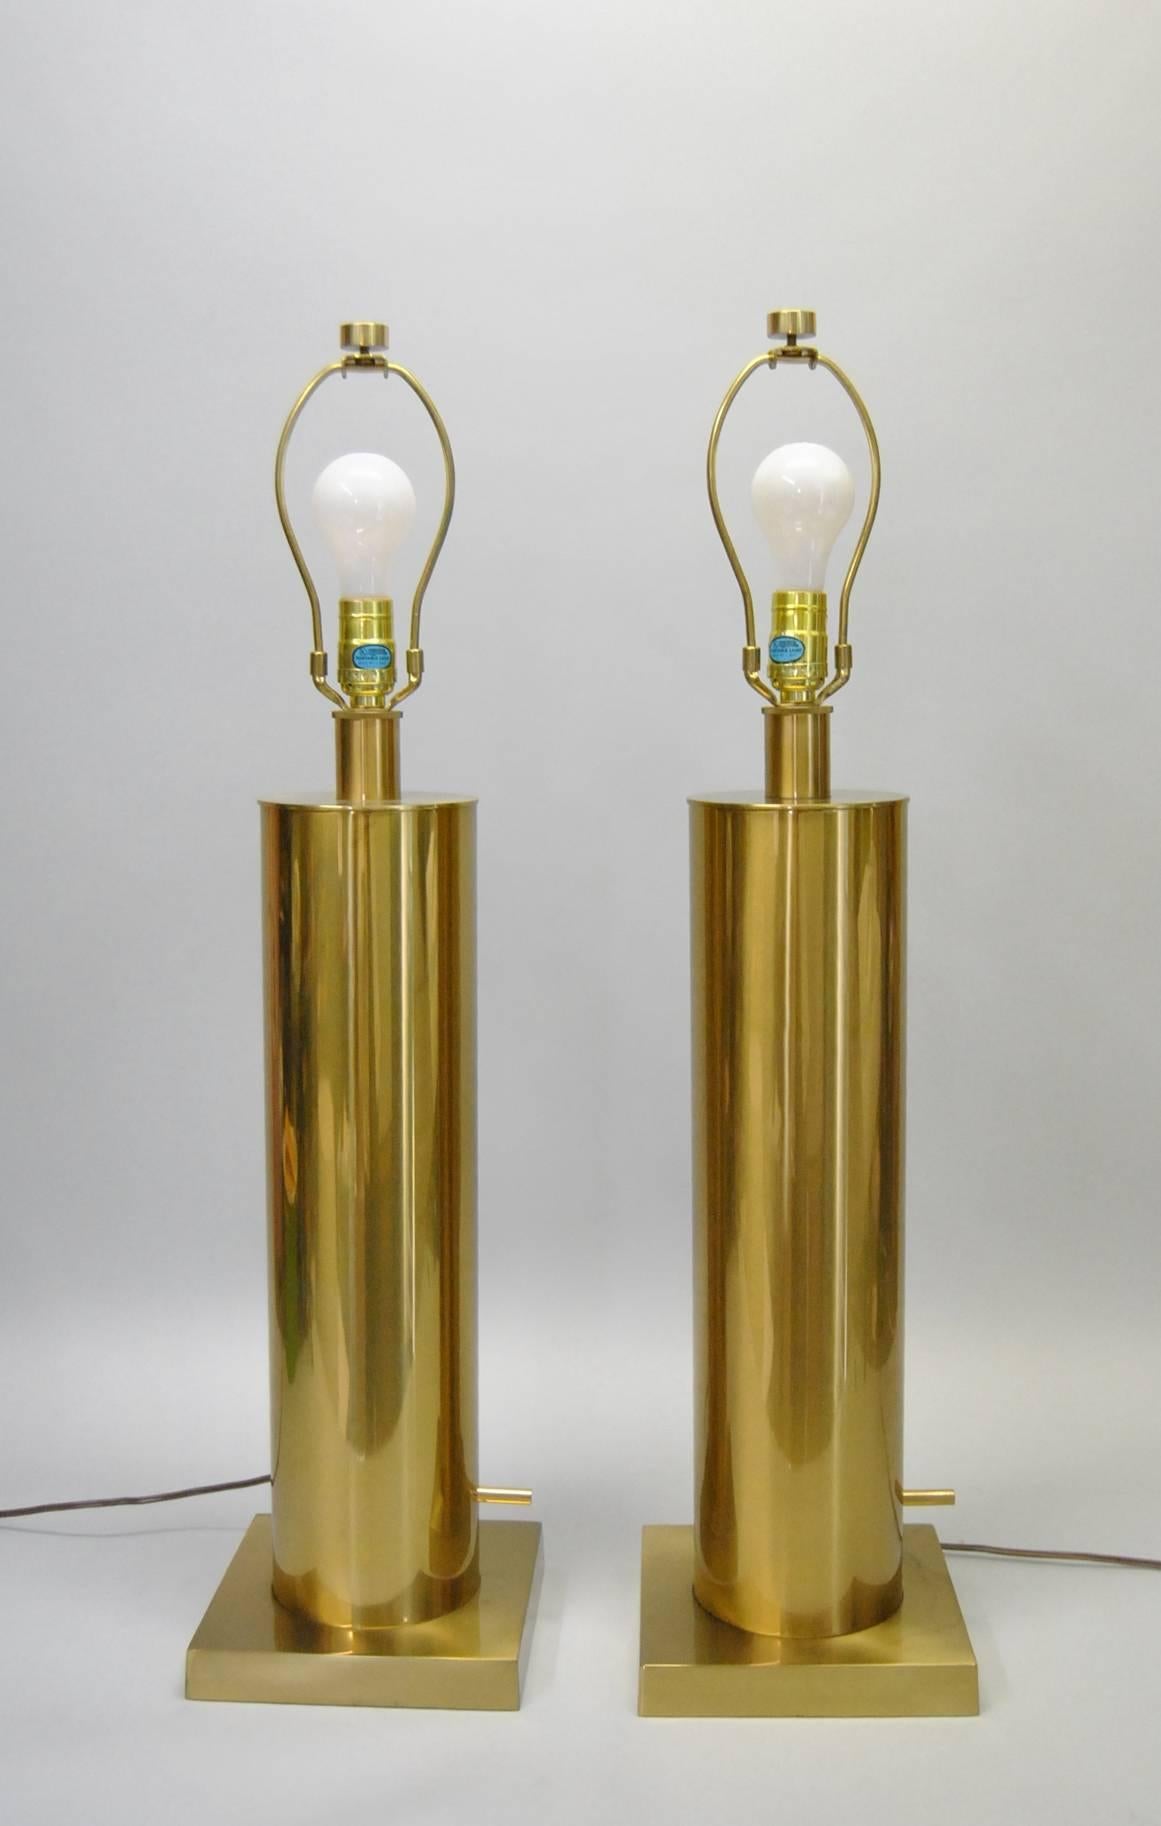 American Pair of Midcentury Brass Lamps by Stiffel